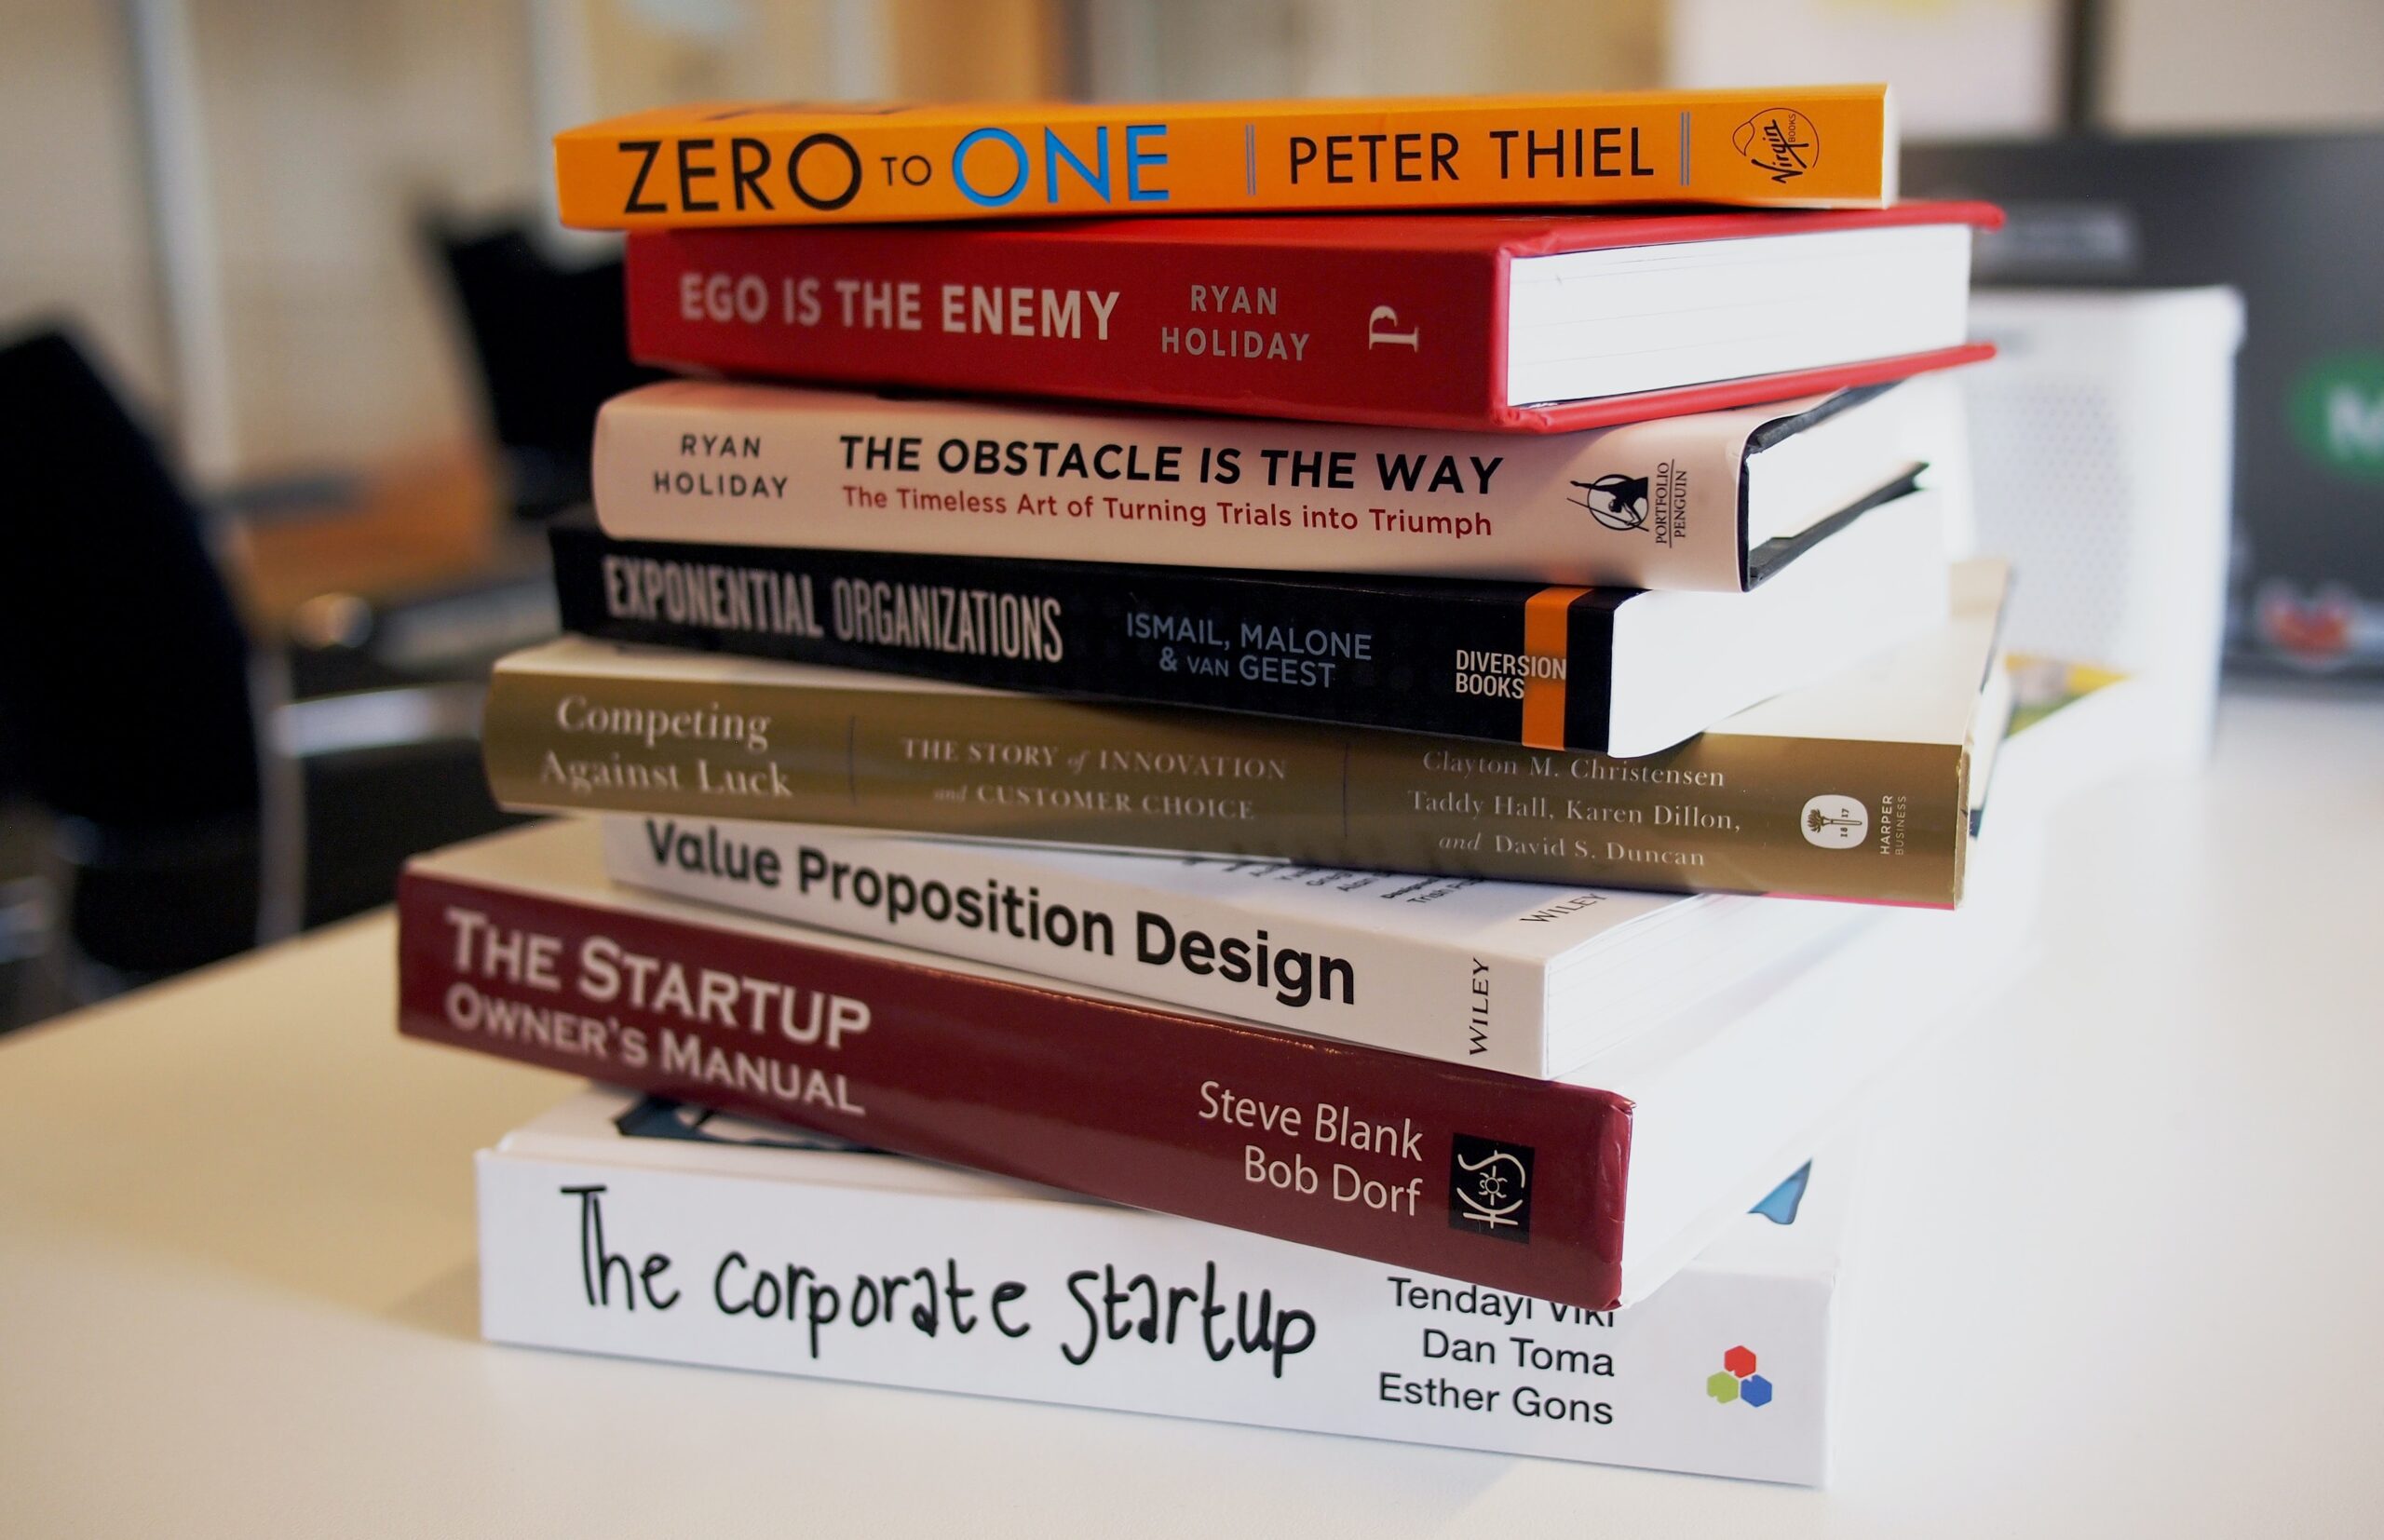 Lessons learned from writing an innovation book